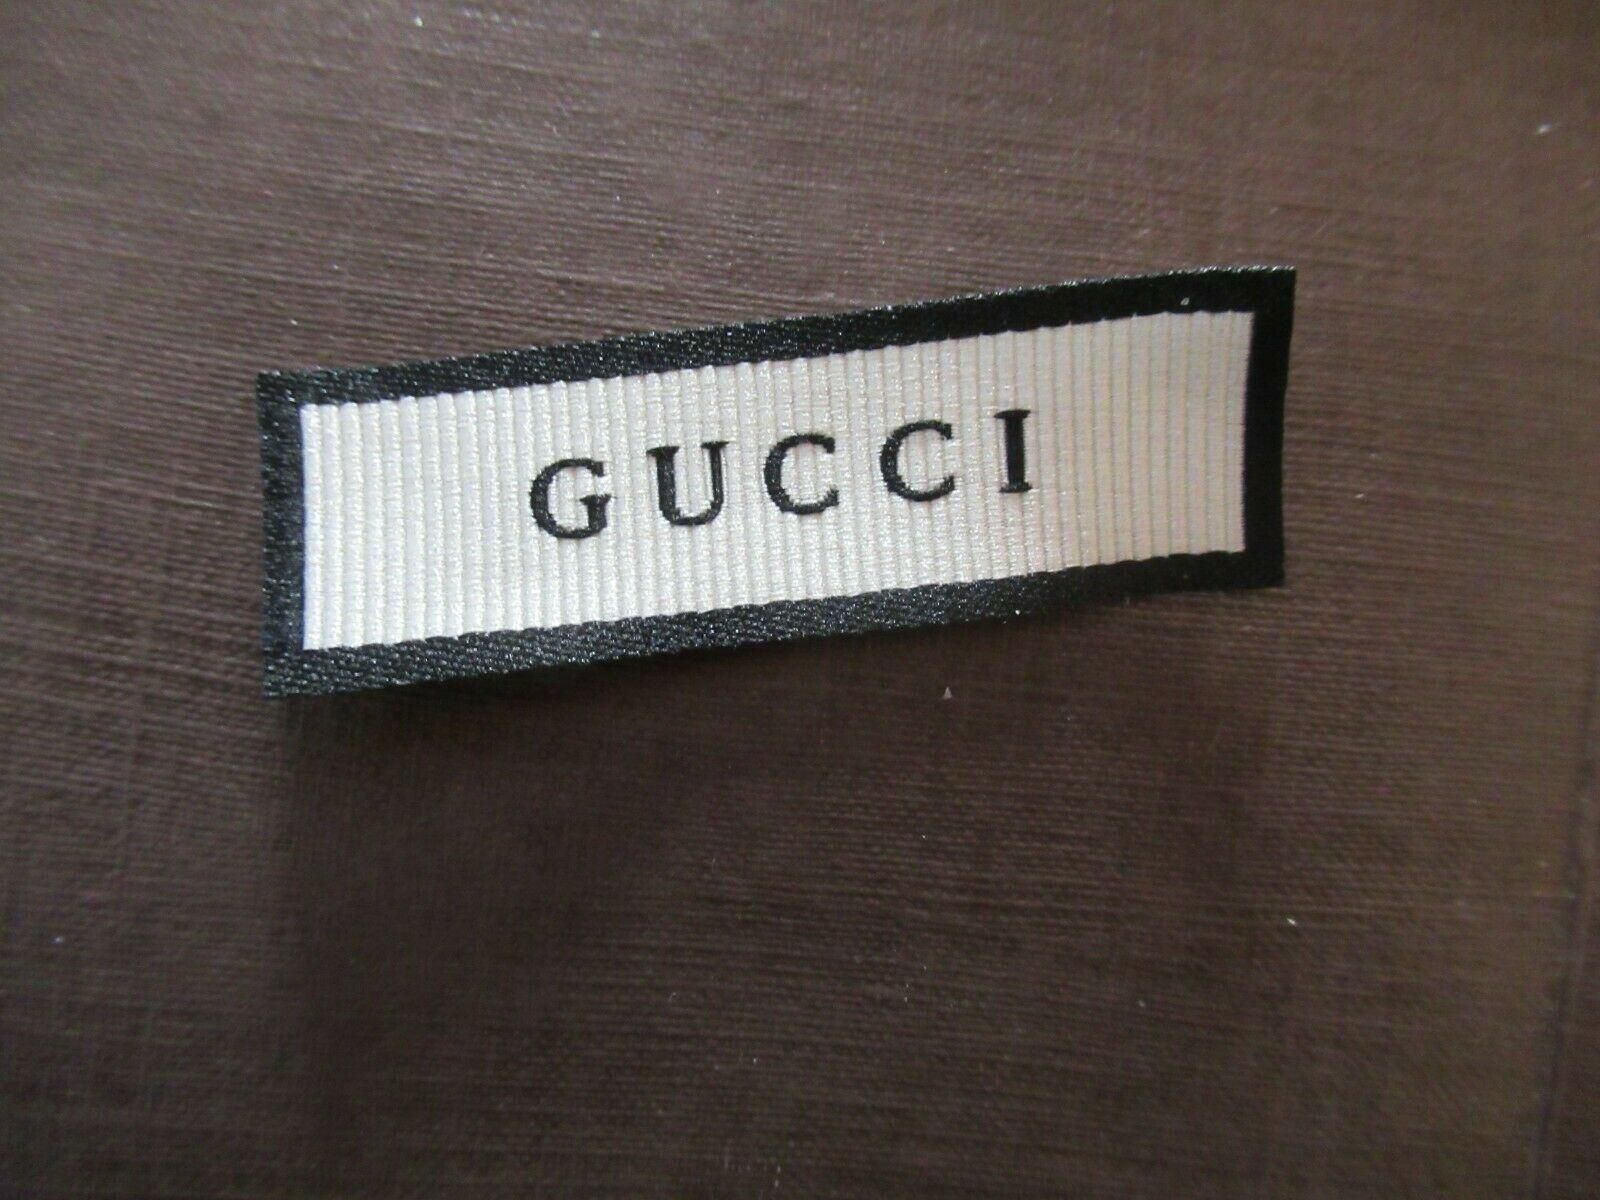 Buy New Listing GUCCI 1 Clothing Designer Tag LABEL Replacement Sewing  Accessories lot 1 Online in Saudi Arabia. 265631201474 price from ubuy in  Saudi Arabia - Yaoota!